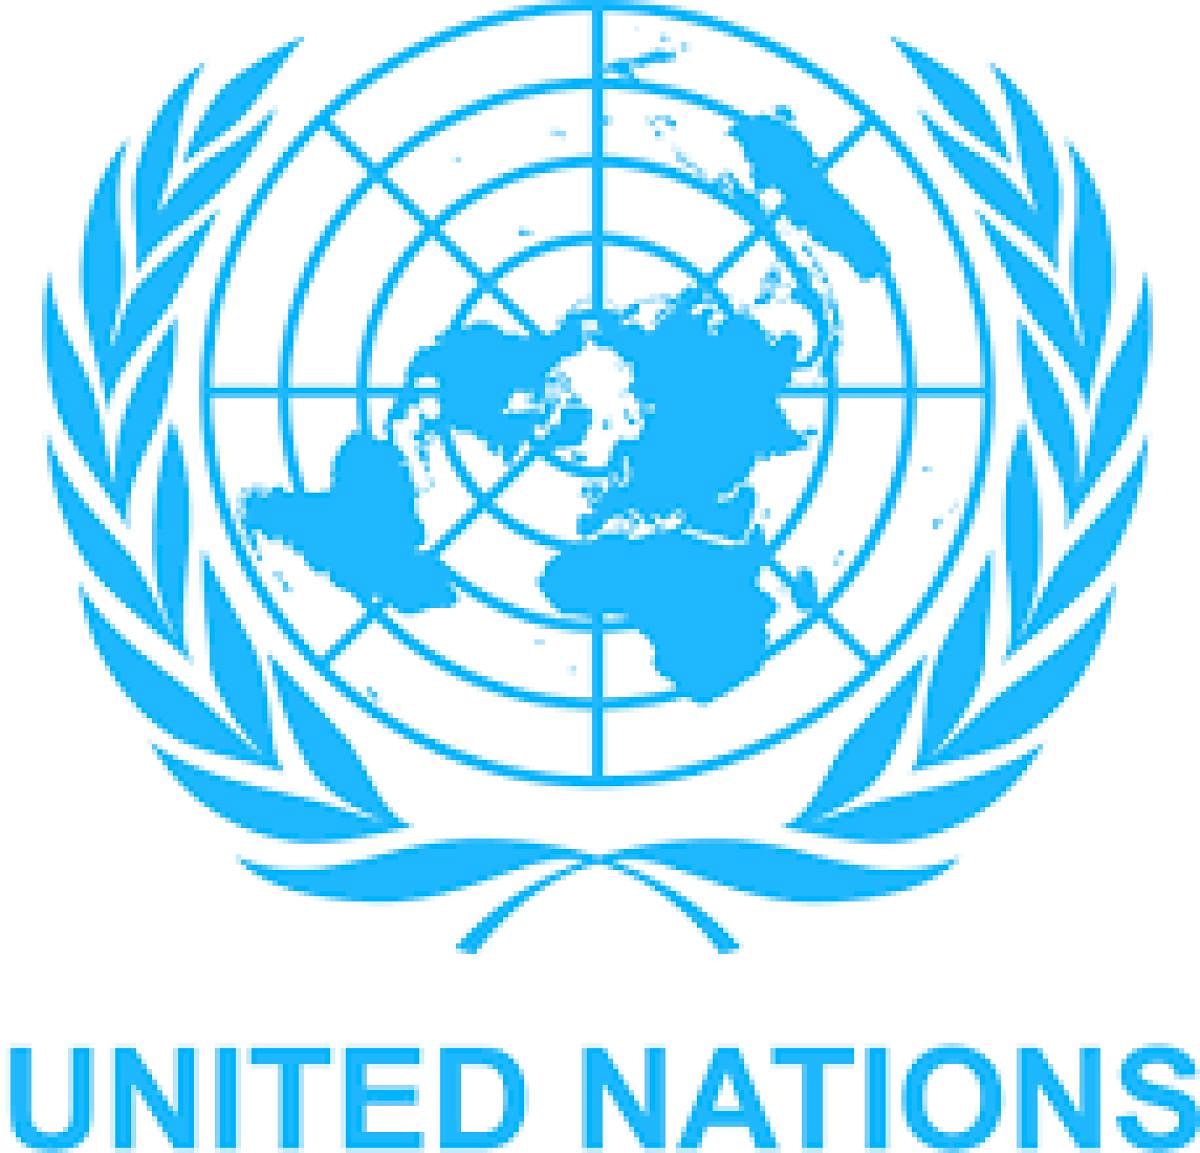 The Logo of the United Nations. (Photo by Wikipedia)